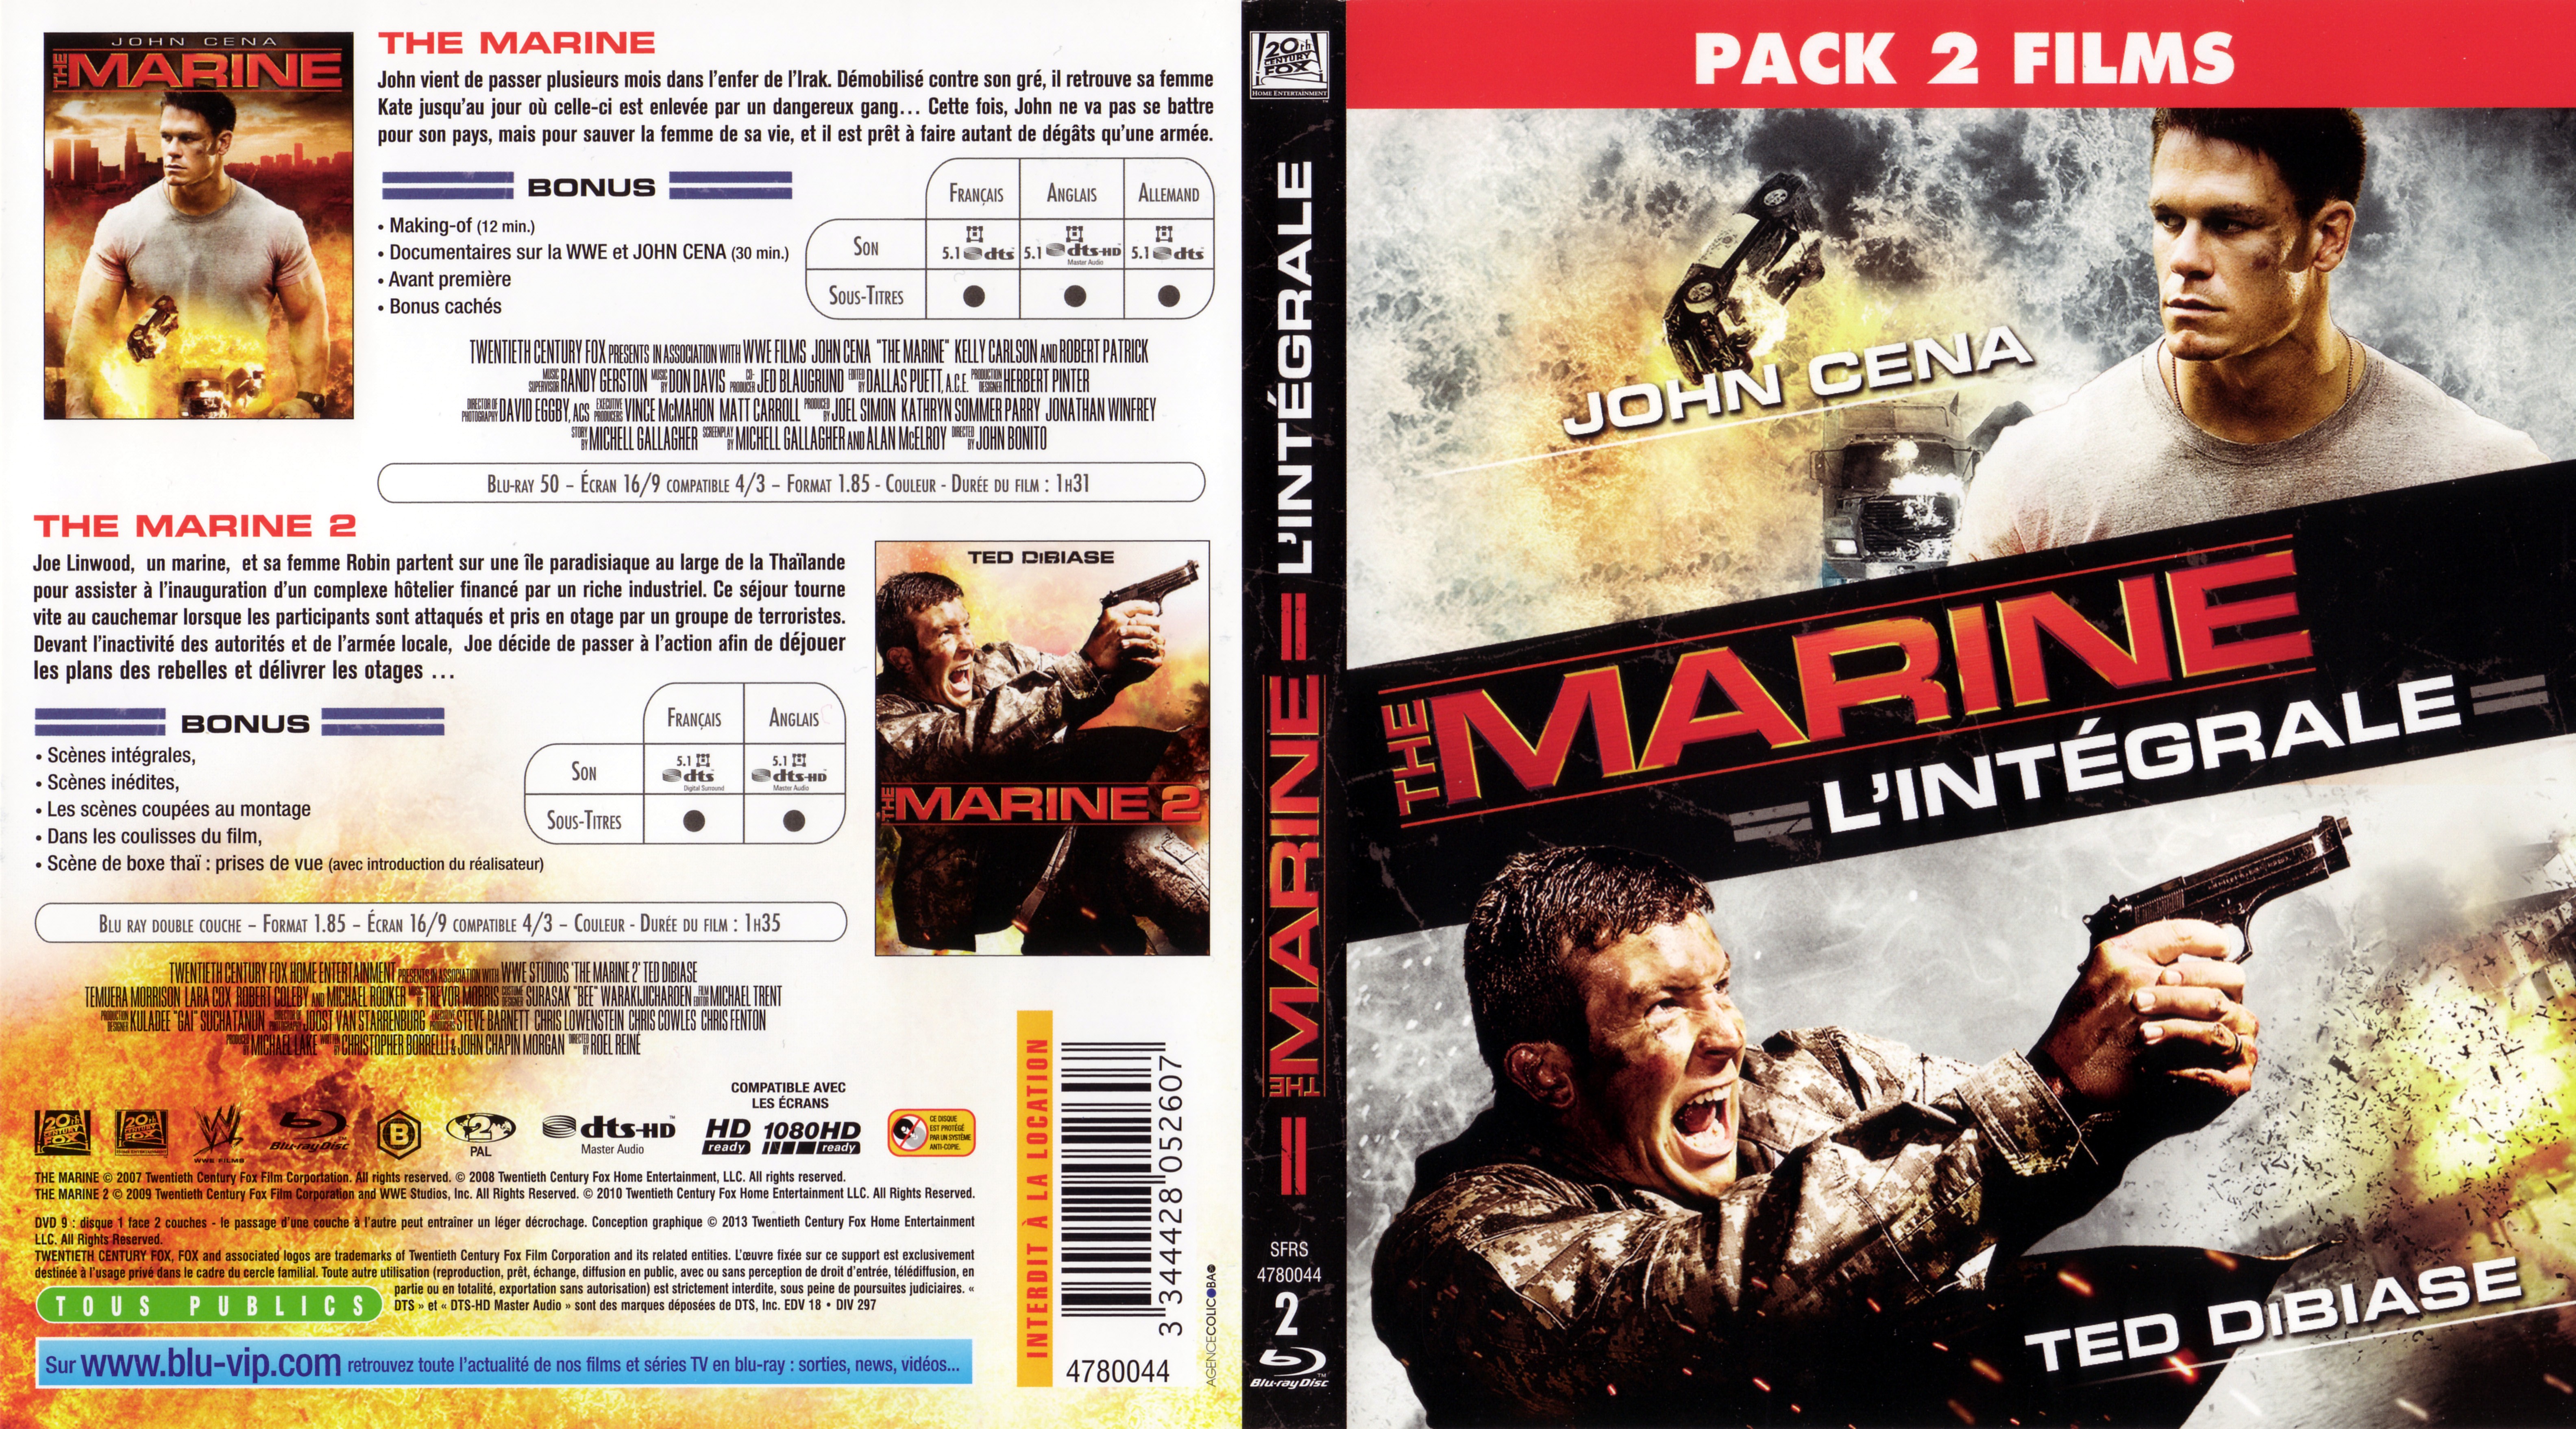 Jaquette DVD The Marine 1 et 2 (BLU-RAY)